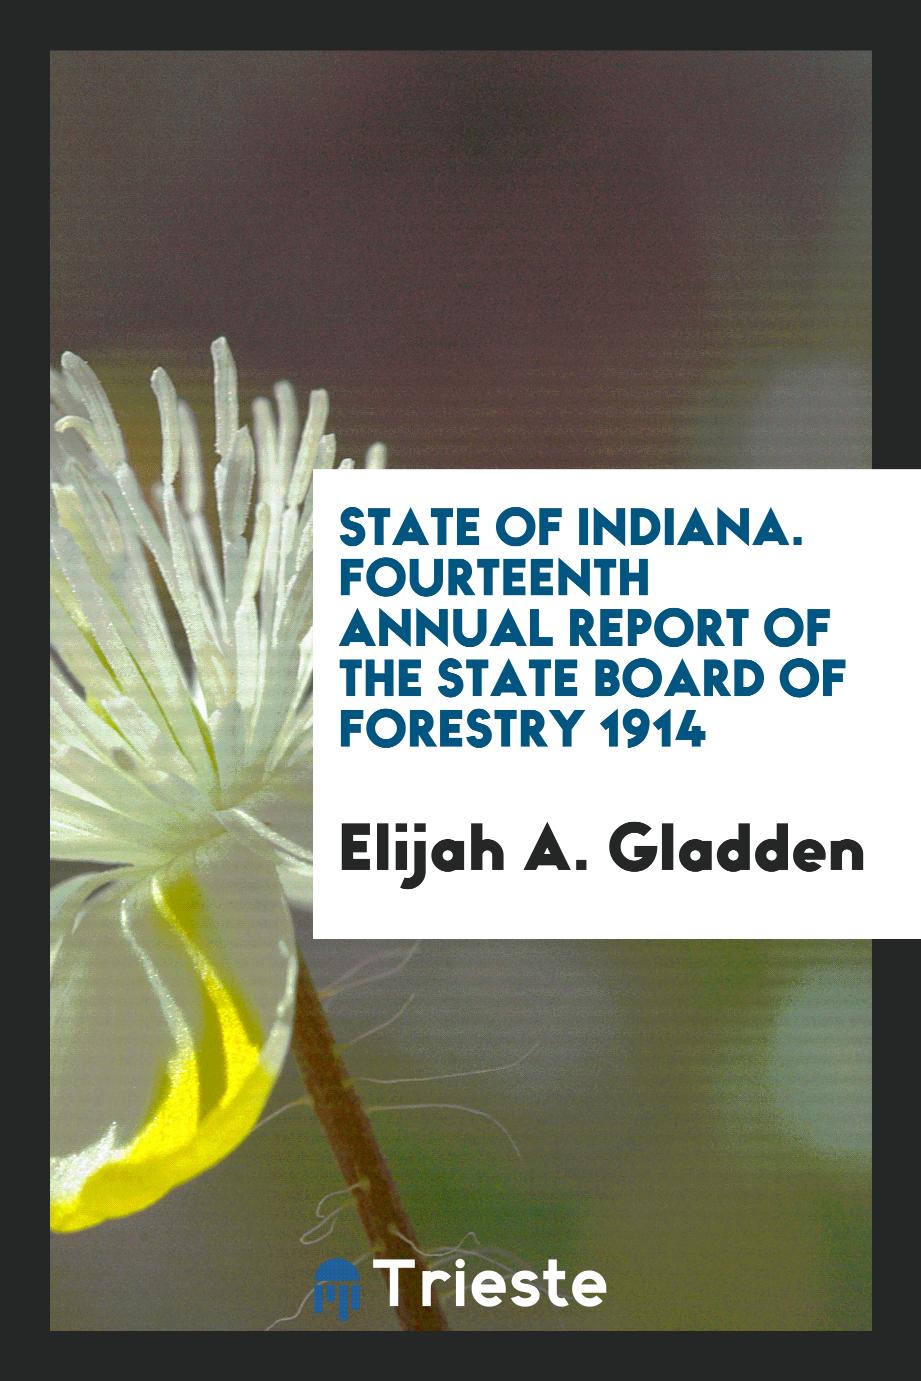 State of Indiana. Fourteenth Annual Report of the State Board of Forestry 1914